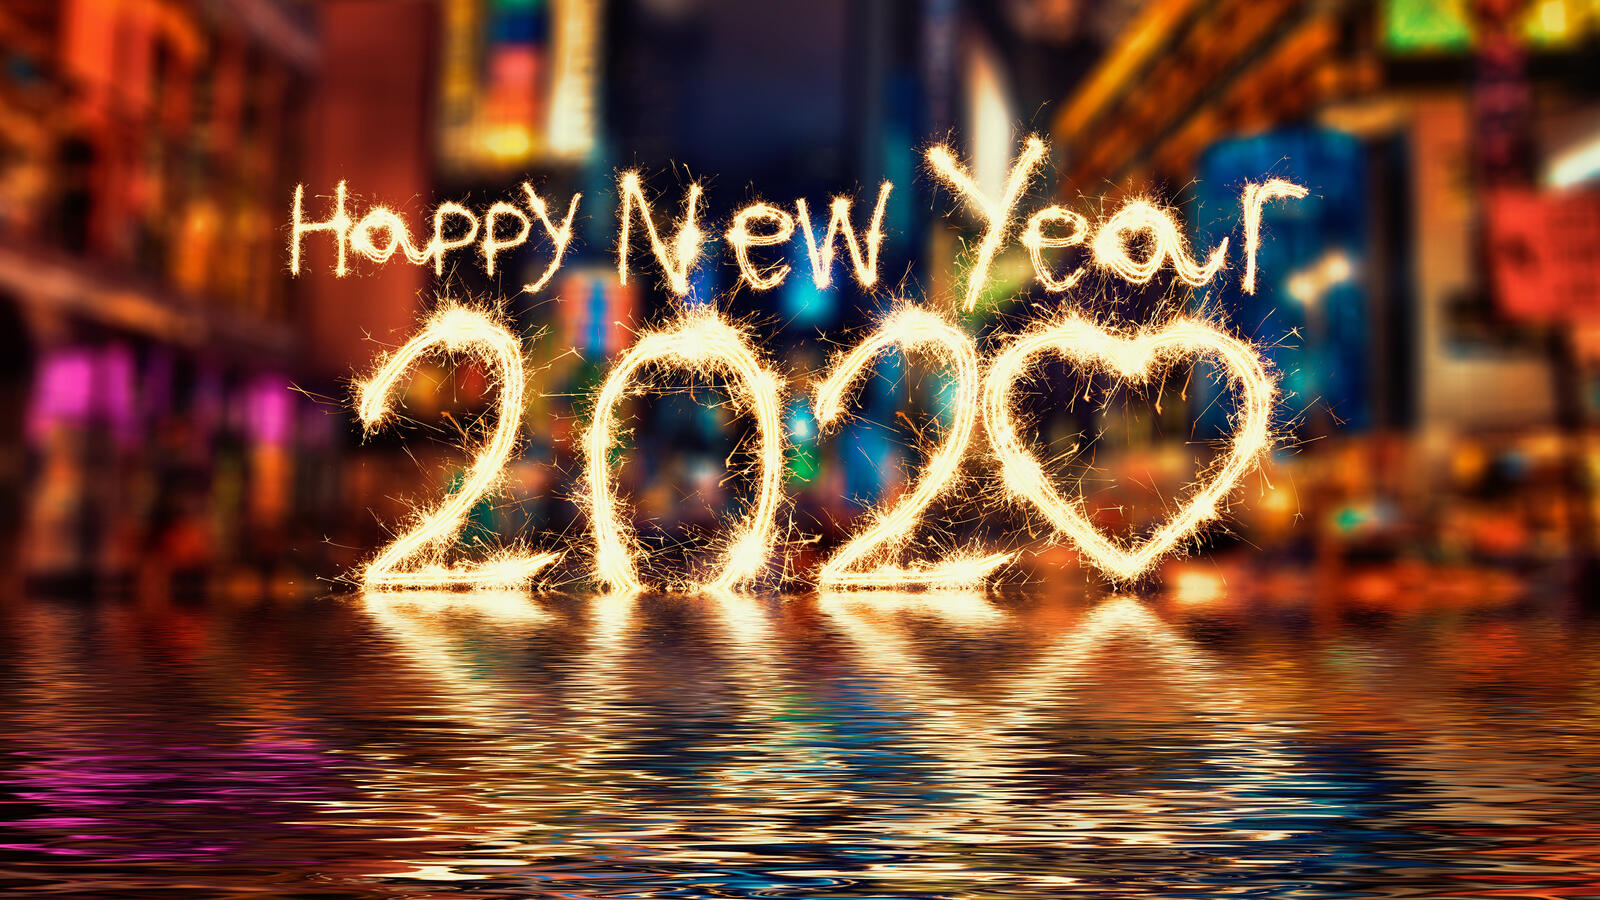 Wallpapers 2020 birthday background happy new year on the desktop